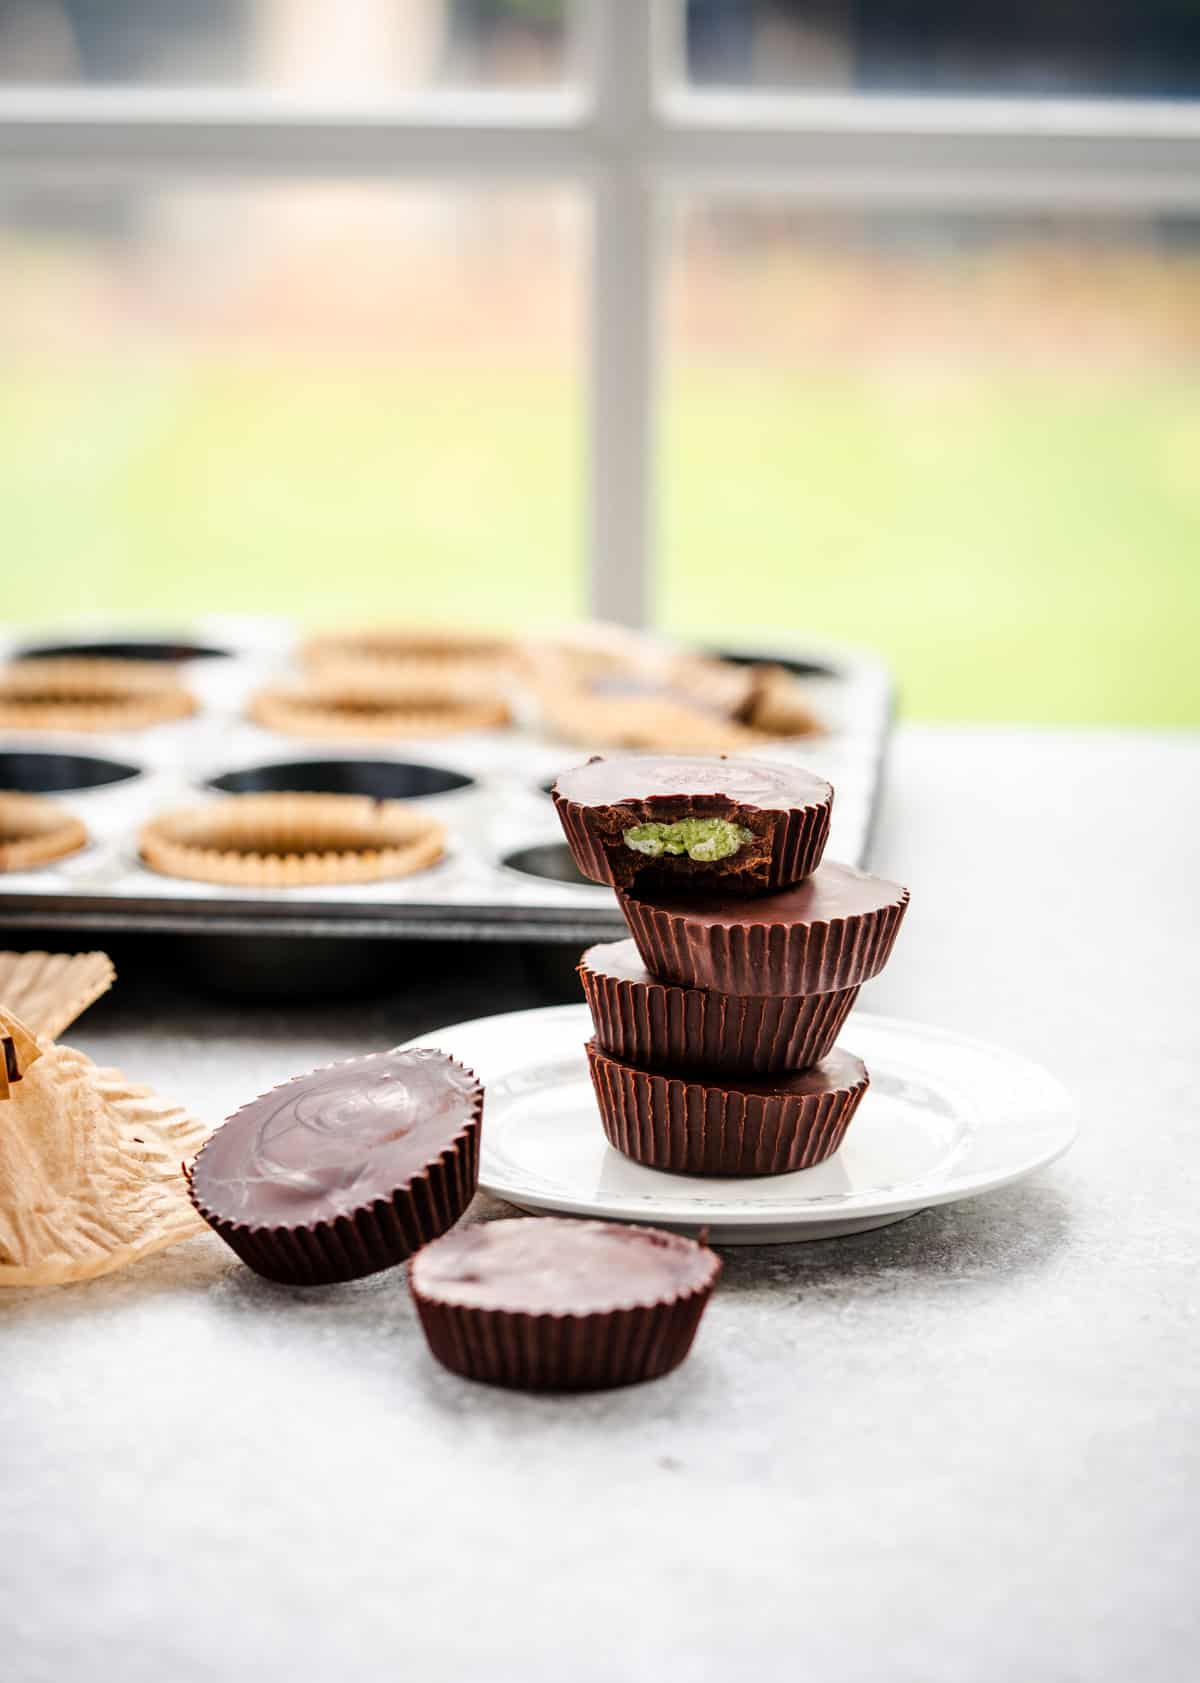 matcha dark chocolate mint cups stacked on a plate, bite out of the top one, muffin tray in background with empty wrappers to the side